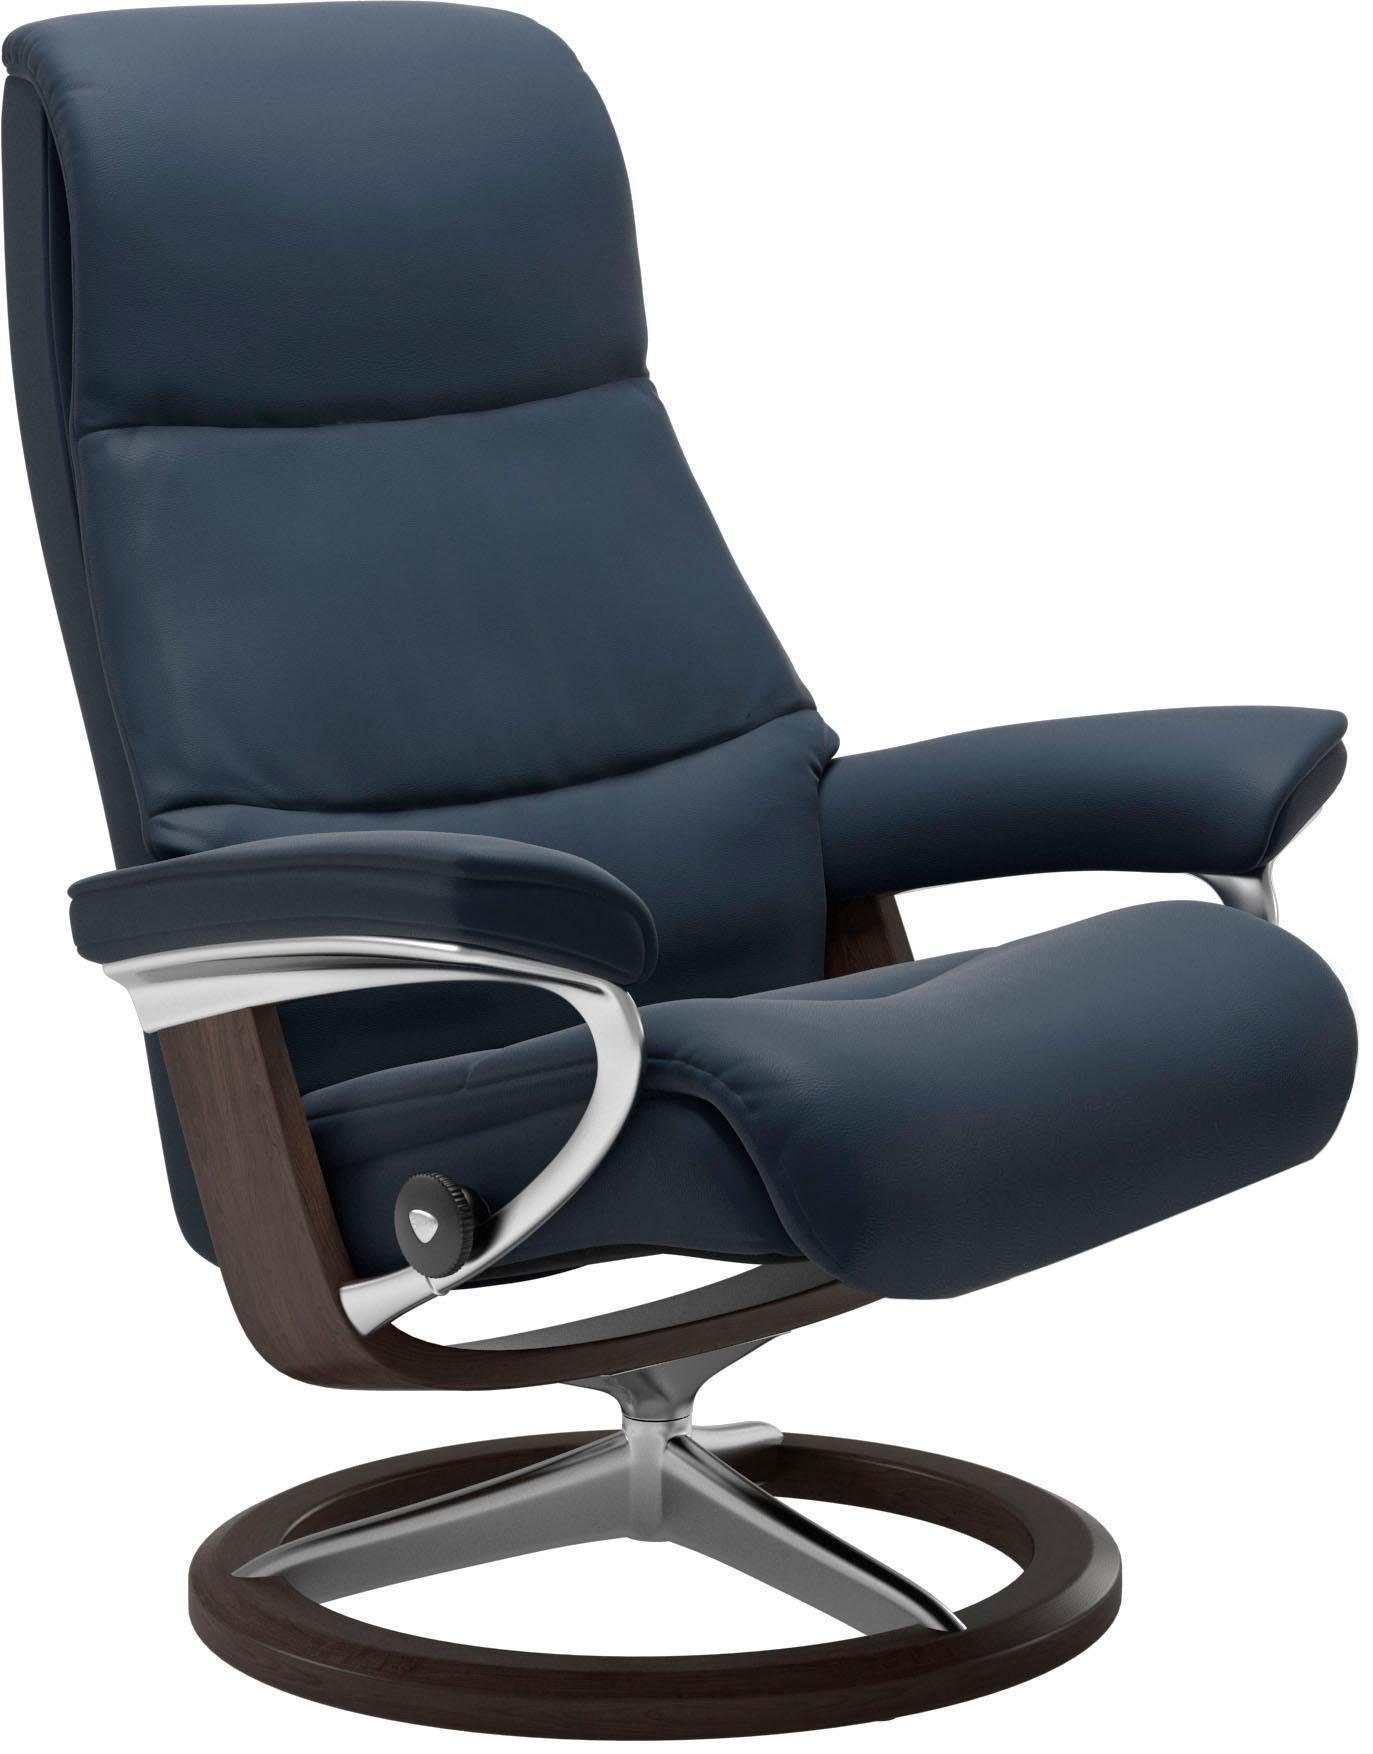 S,Gestell Signature Stressless® Relaxsessel Größe mit Base, View, Wenge